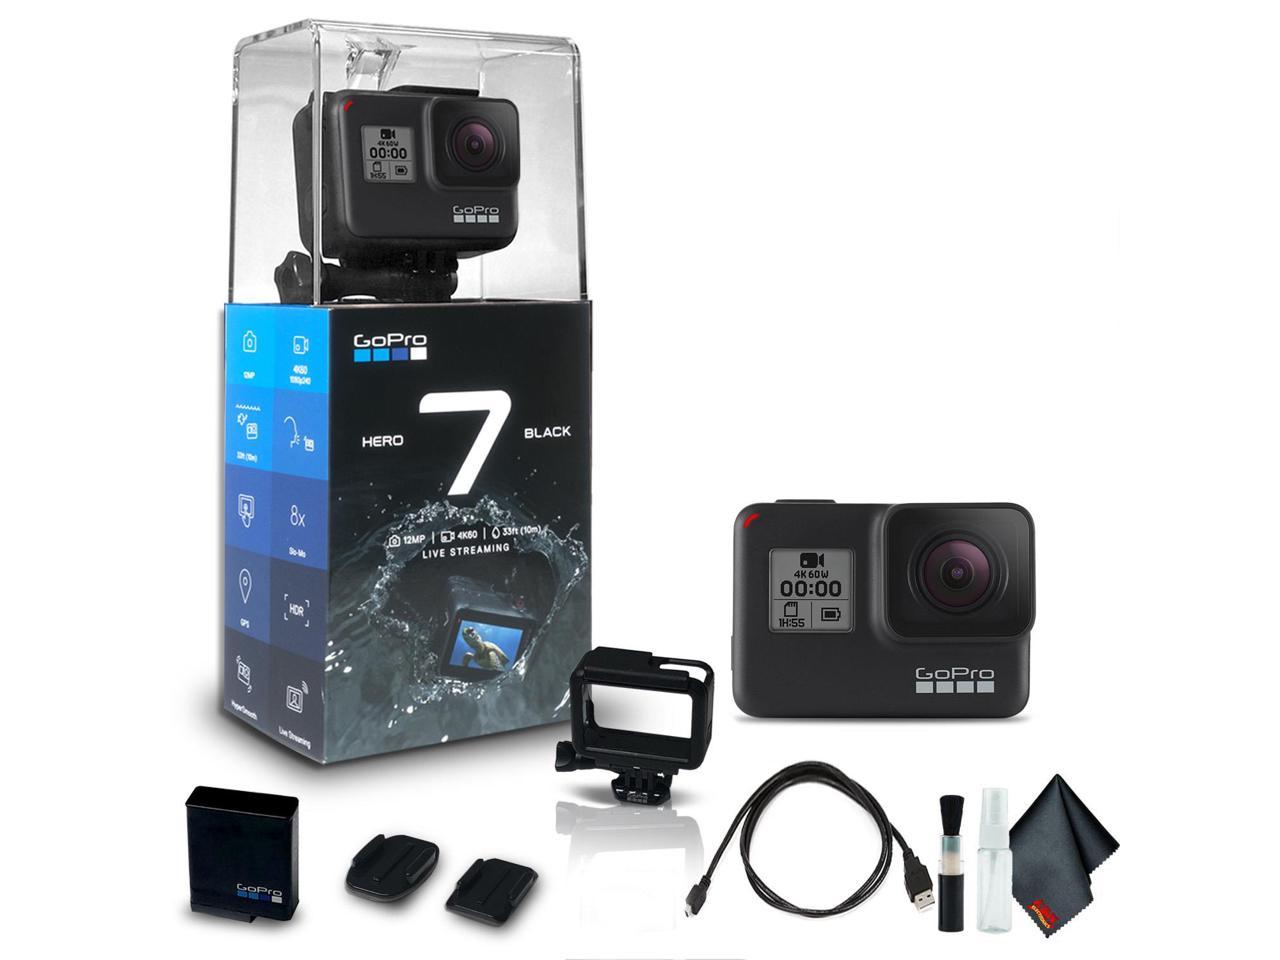 gopro hero7 black waterproof action camera with touch screen, 4k hd video, 12mp photos, live streaming and stabilization base bundle